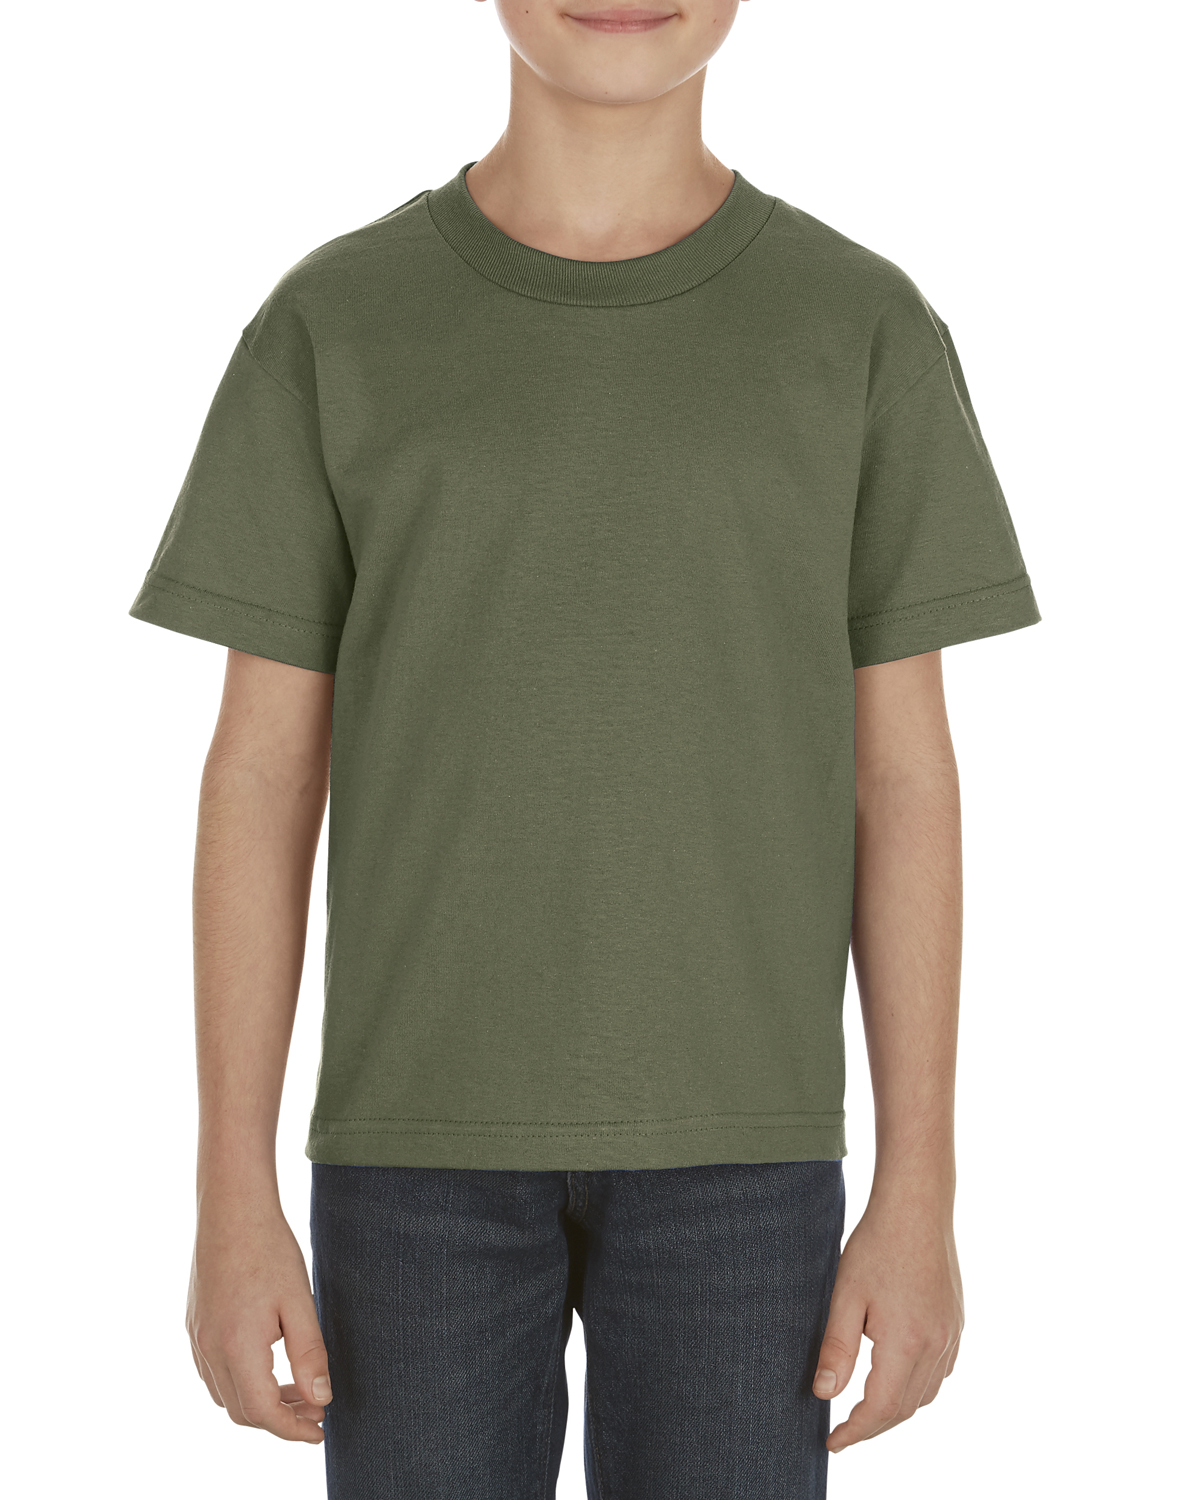 Selected Color is Military Green